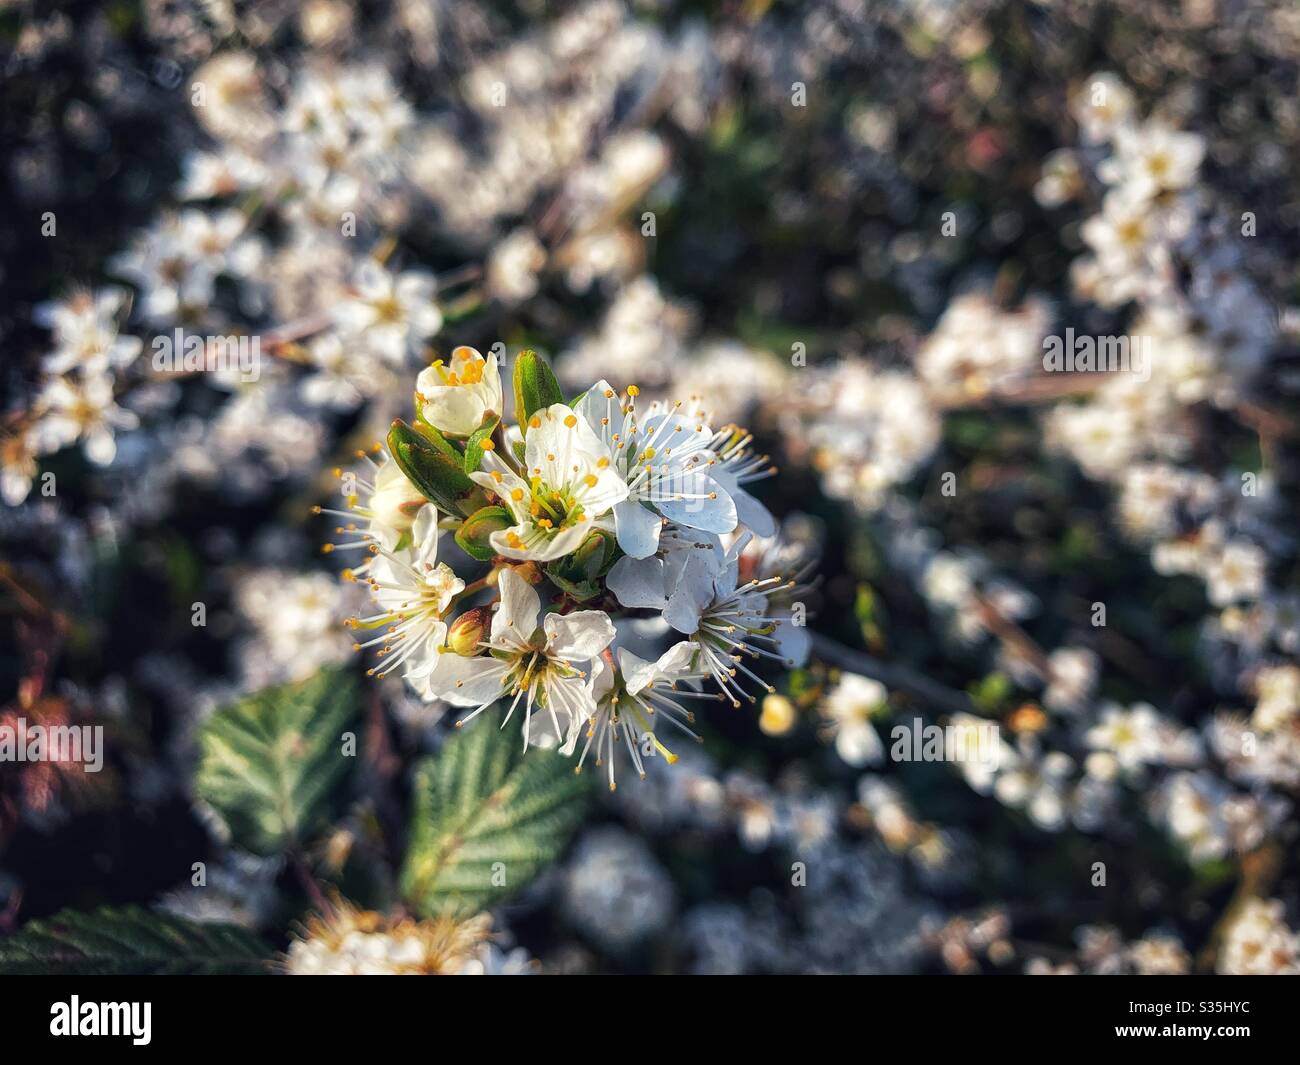 Springtime blossom. White and yellow flowers in focus in the foreground with out of focus’s white and yellow flowers in the background. Stock Photo